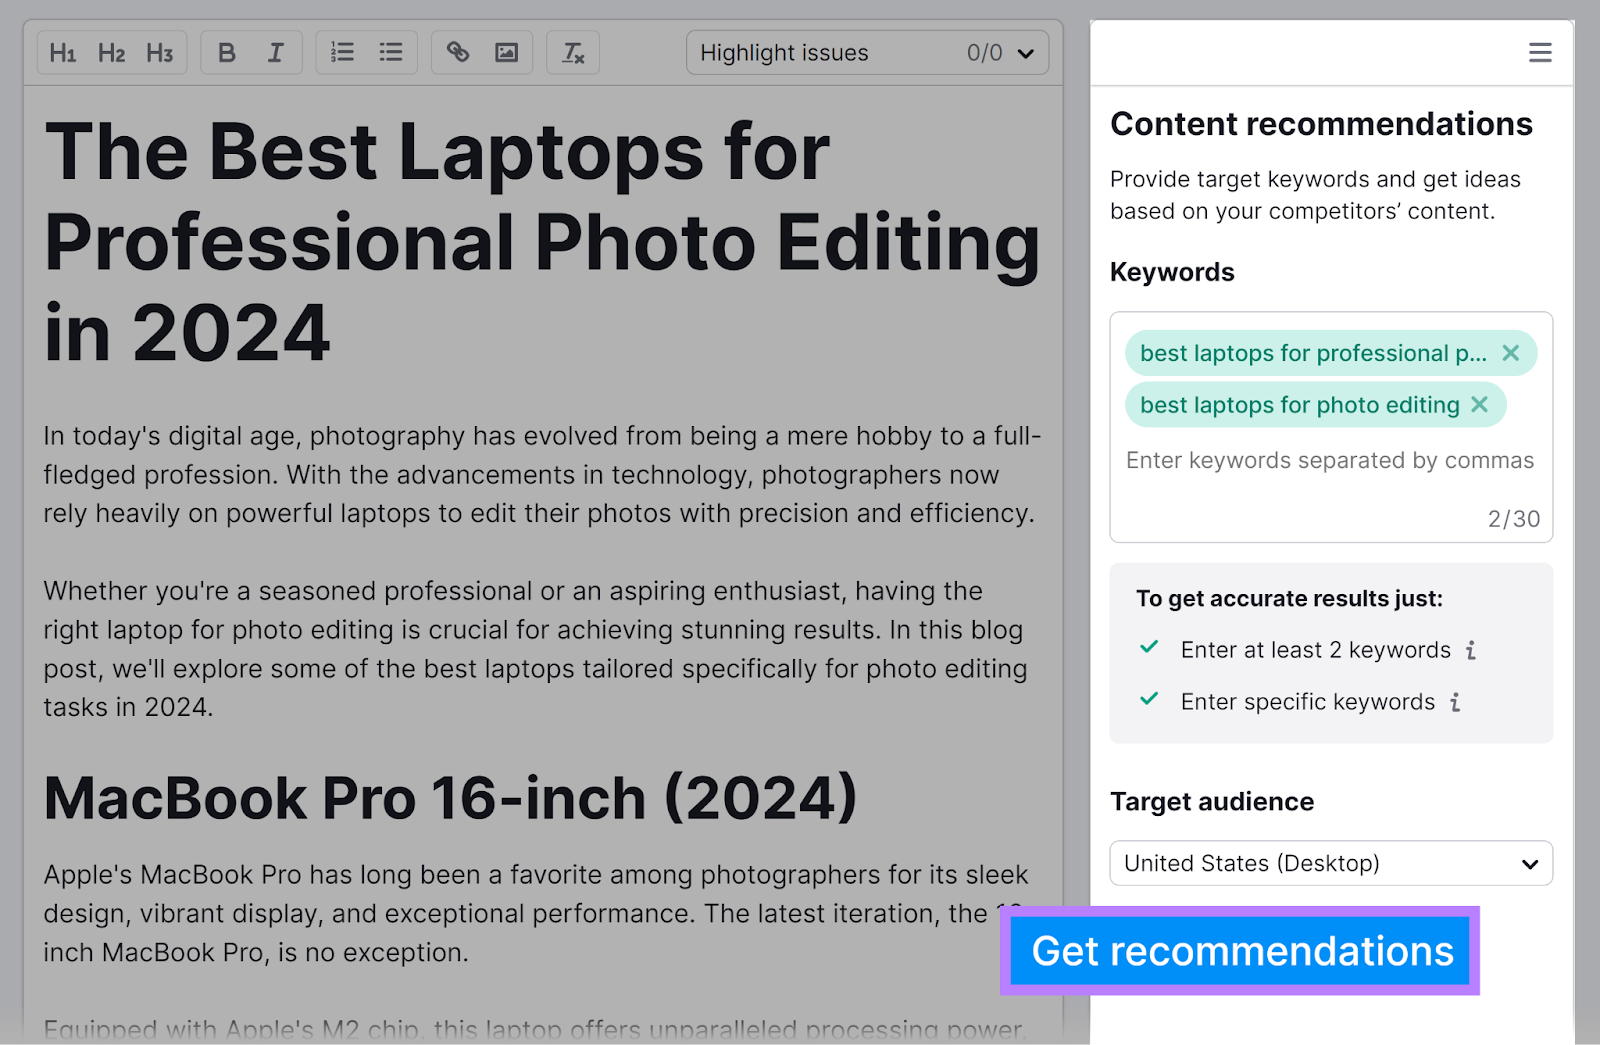 Content Recommendations sidebar and Get recommendations button highlighted.